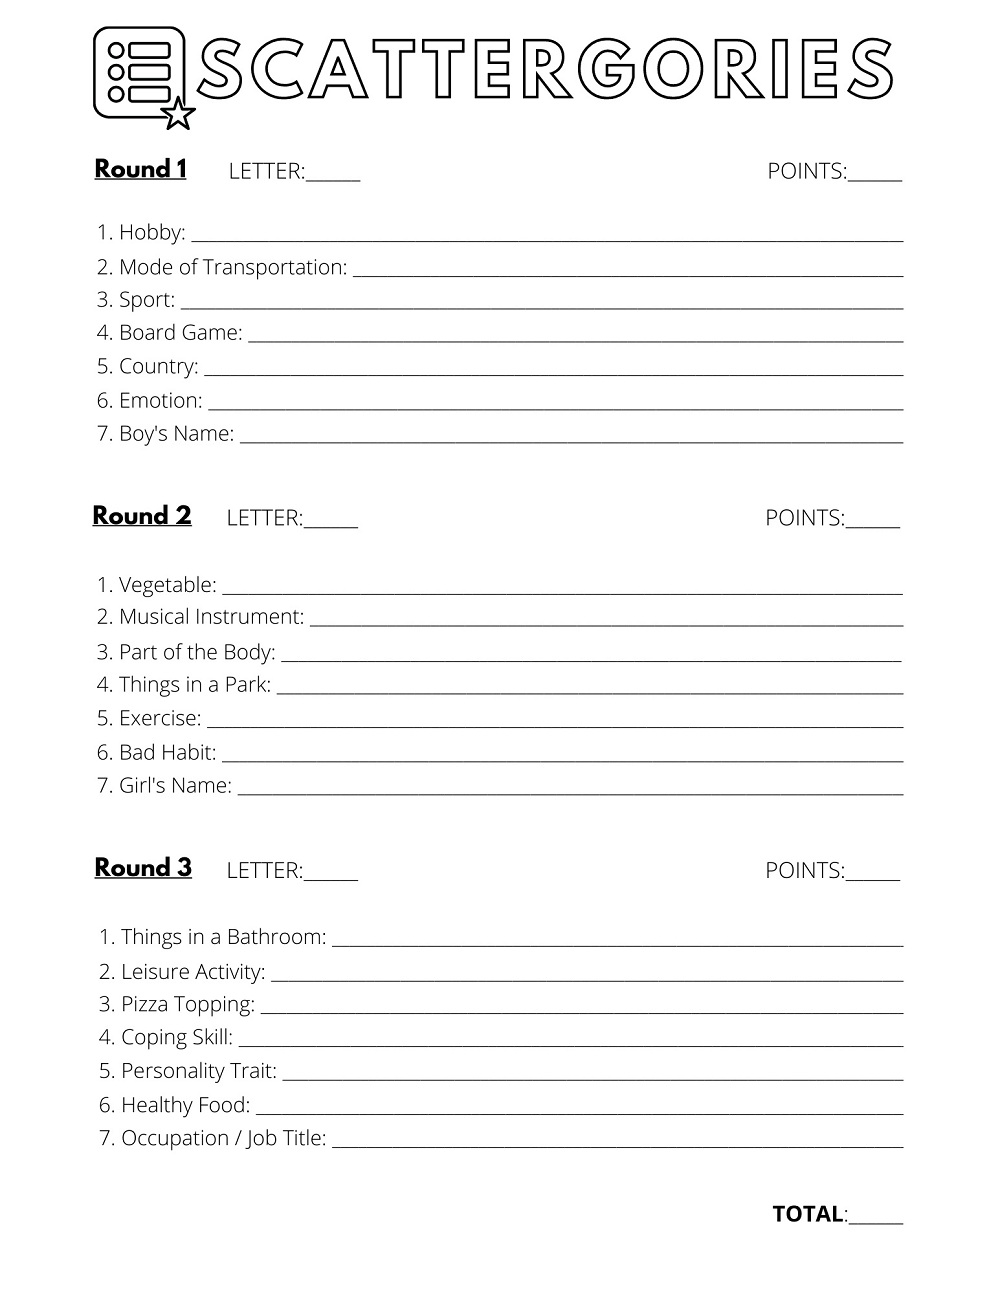 Scattergories Sheet for Therapeutic Recreation